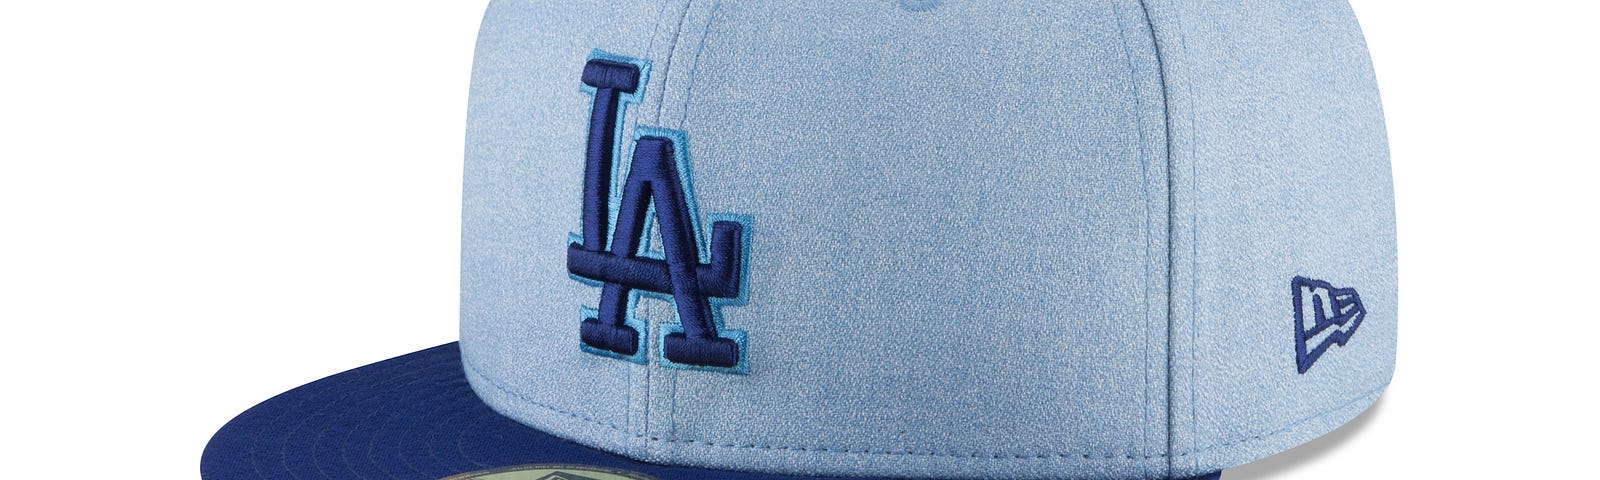 MLB raises prostate cancer awareness on Father's Day weekend, by Rowan  Kavner